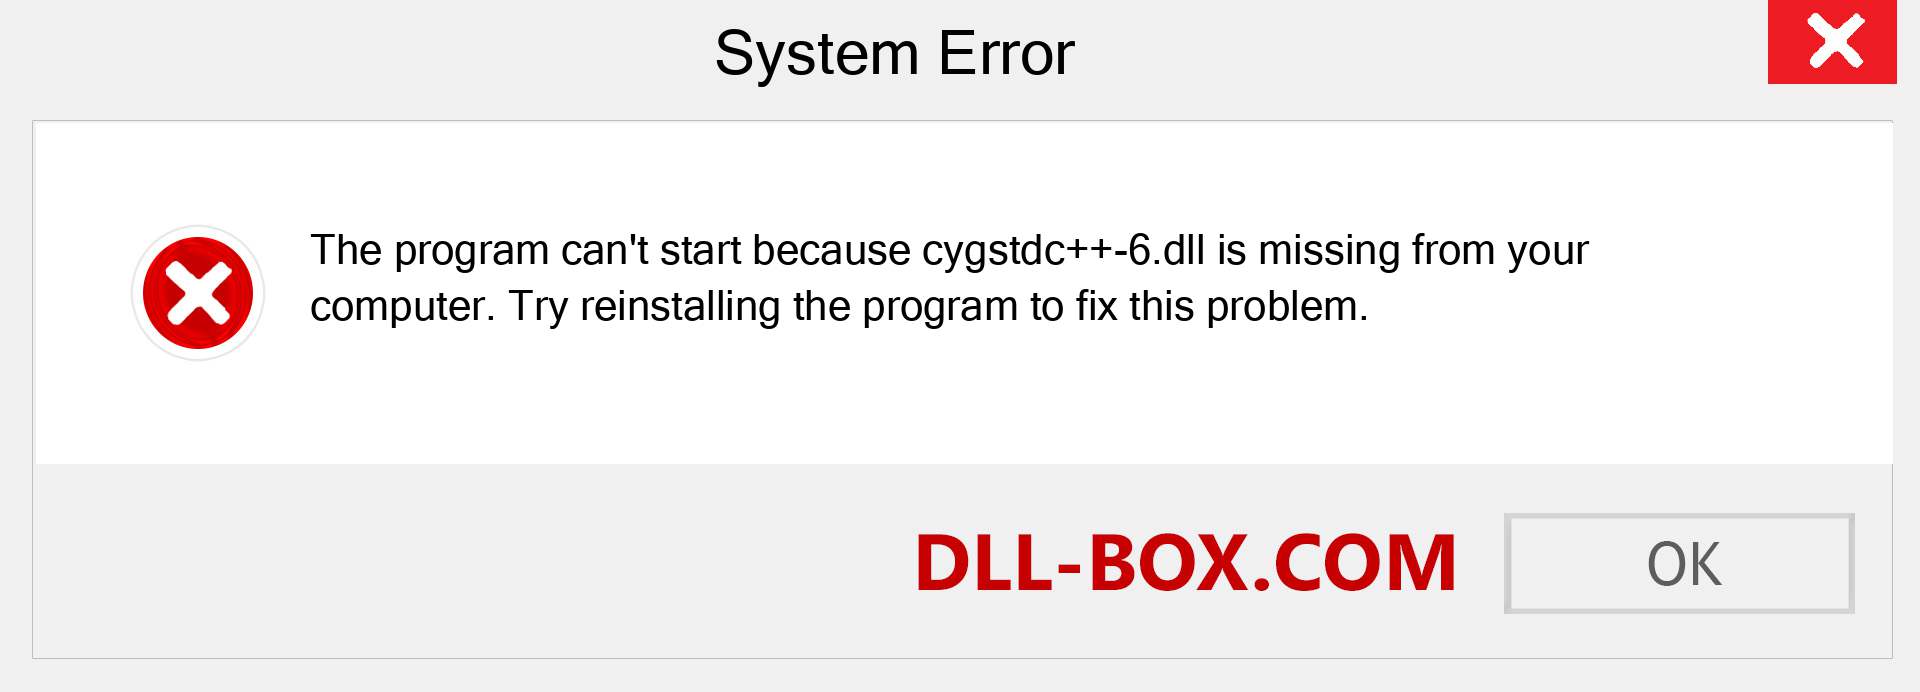  cygstdc++-6.dll file is missing?. Download for Windows 7, 8, 10 - Fix  cygstdc++-6 dll Missing Error on Windows, photos, images